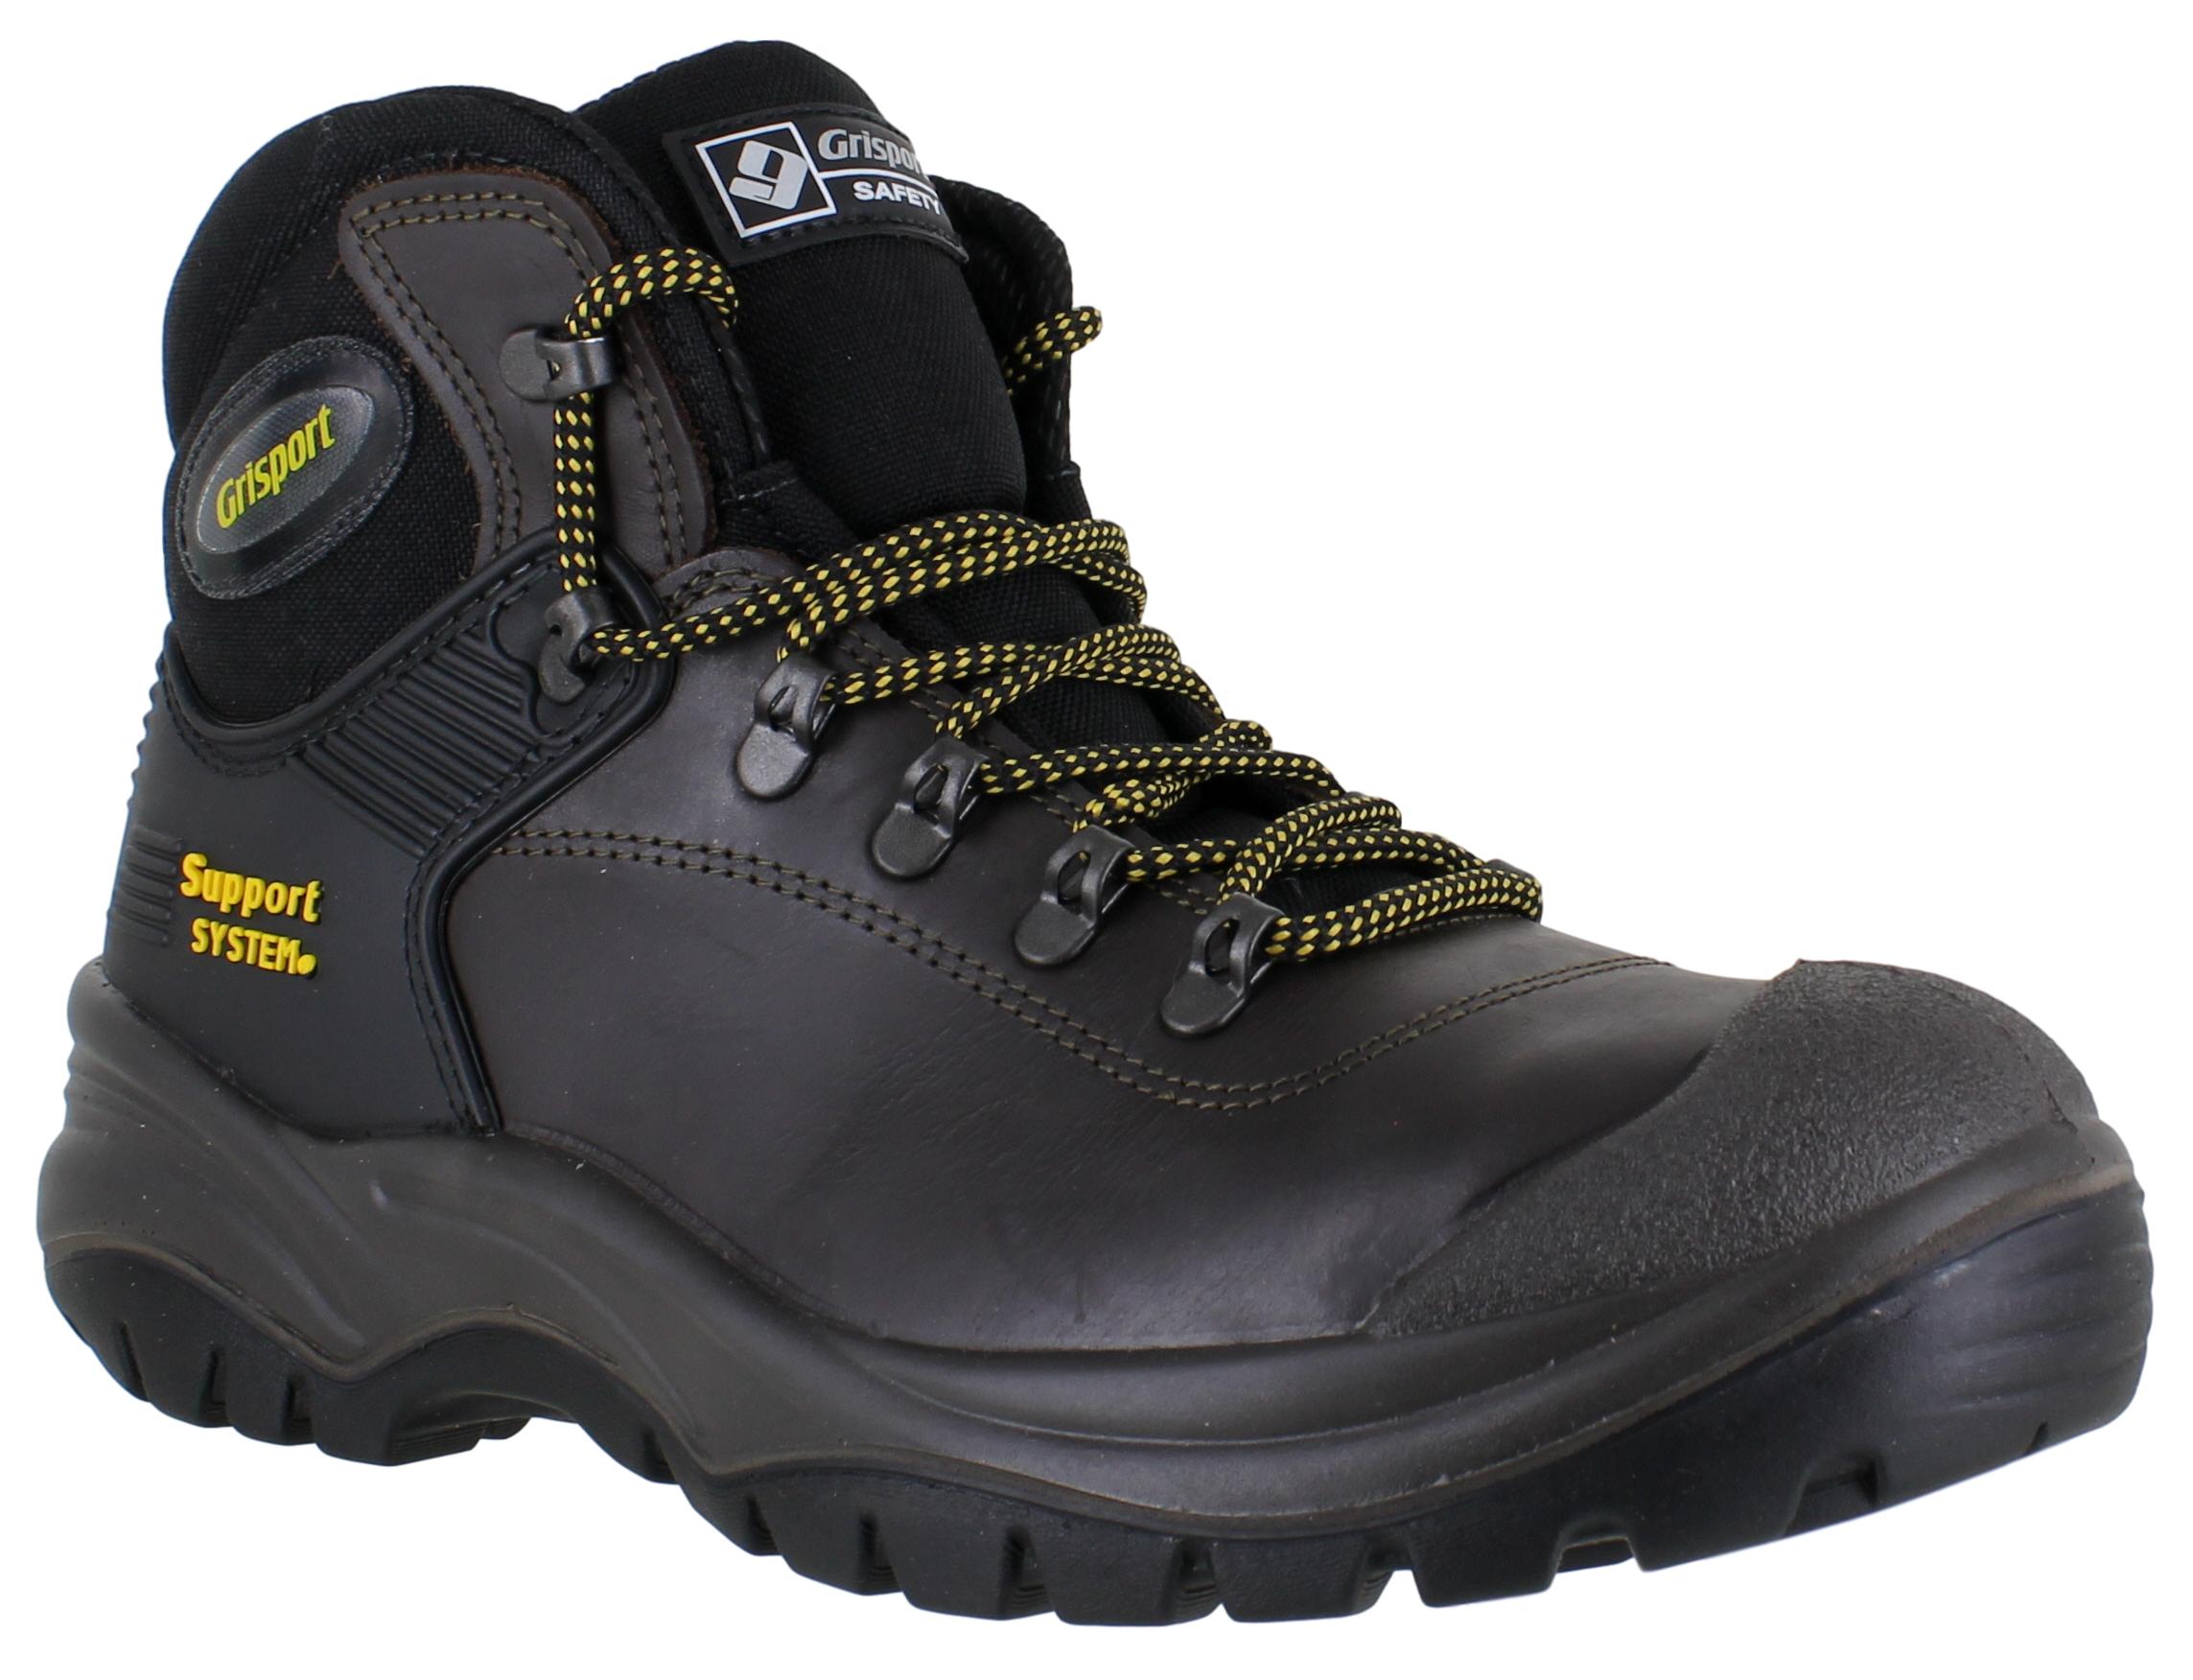 grisport men's contractor s3 safety boots